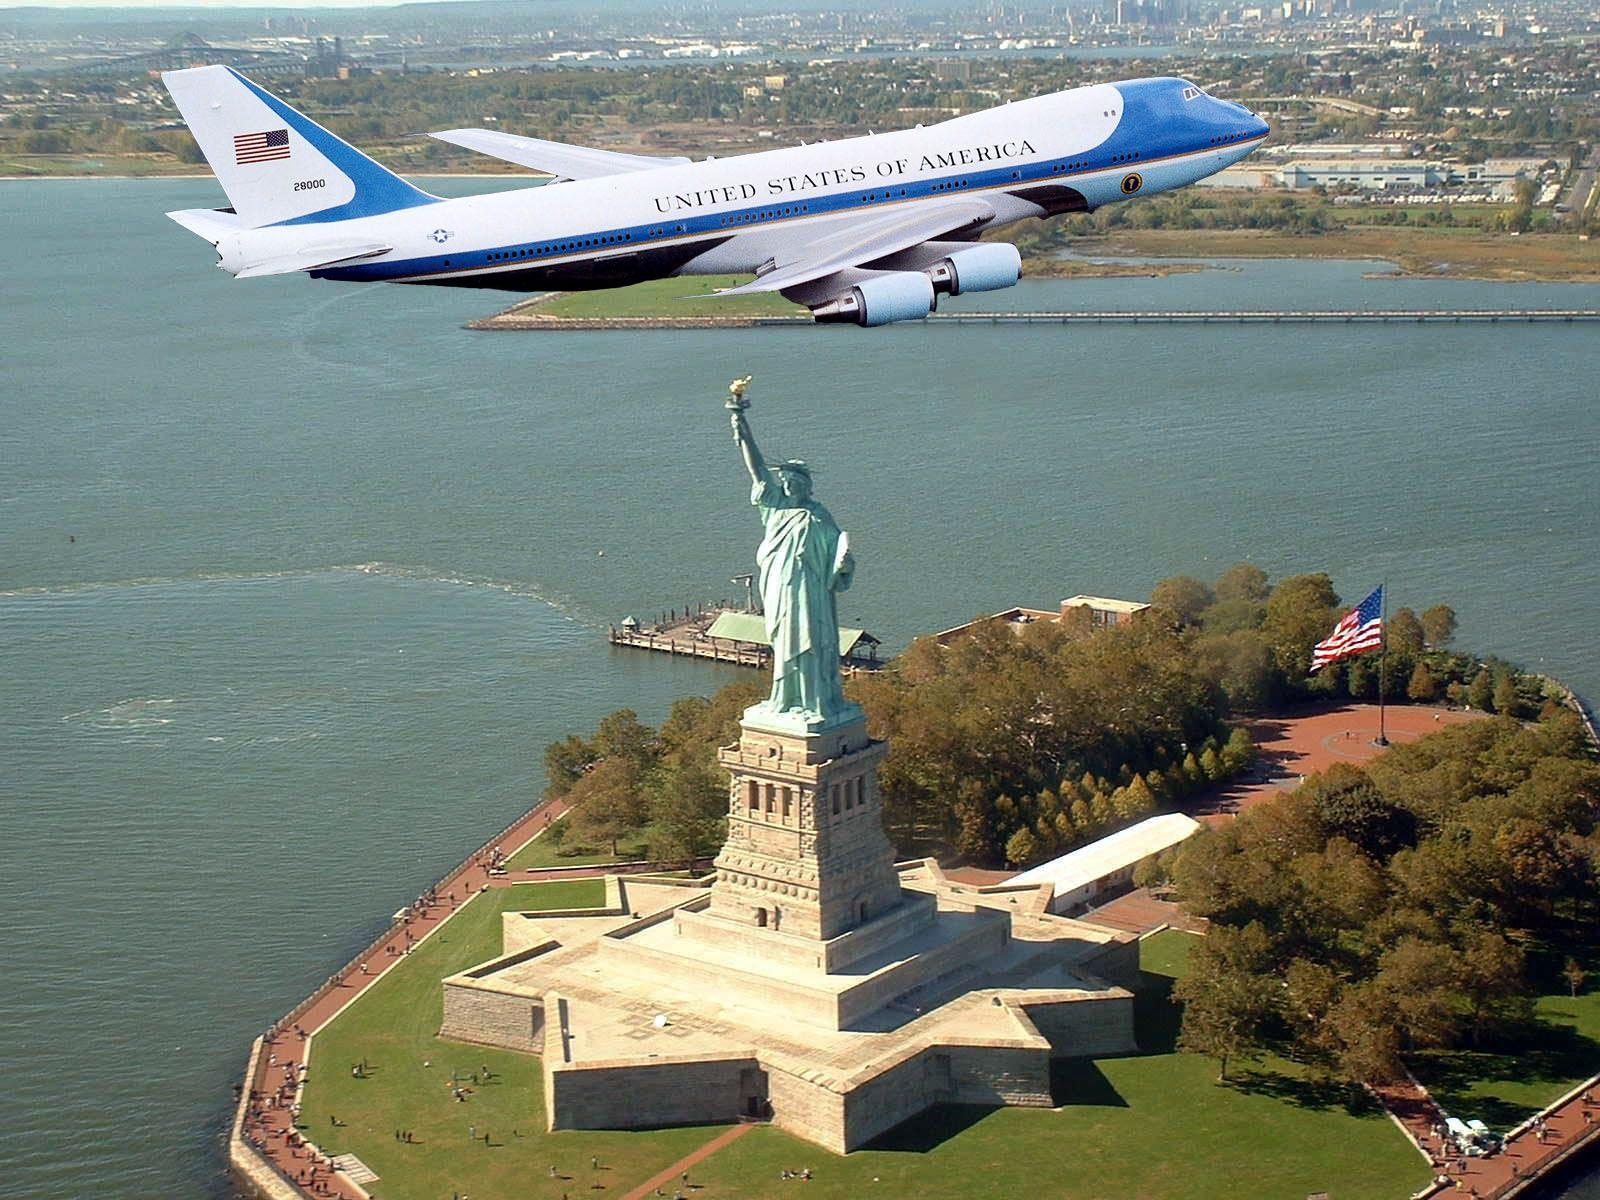 Air Force One over Lady Liberty, Boeing 747. Aviation